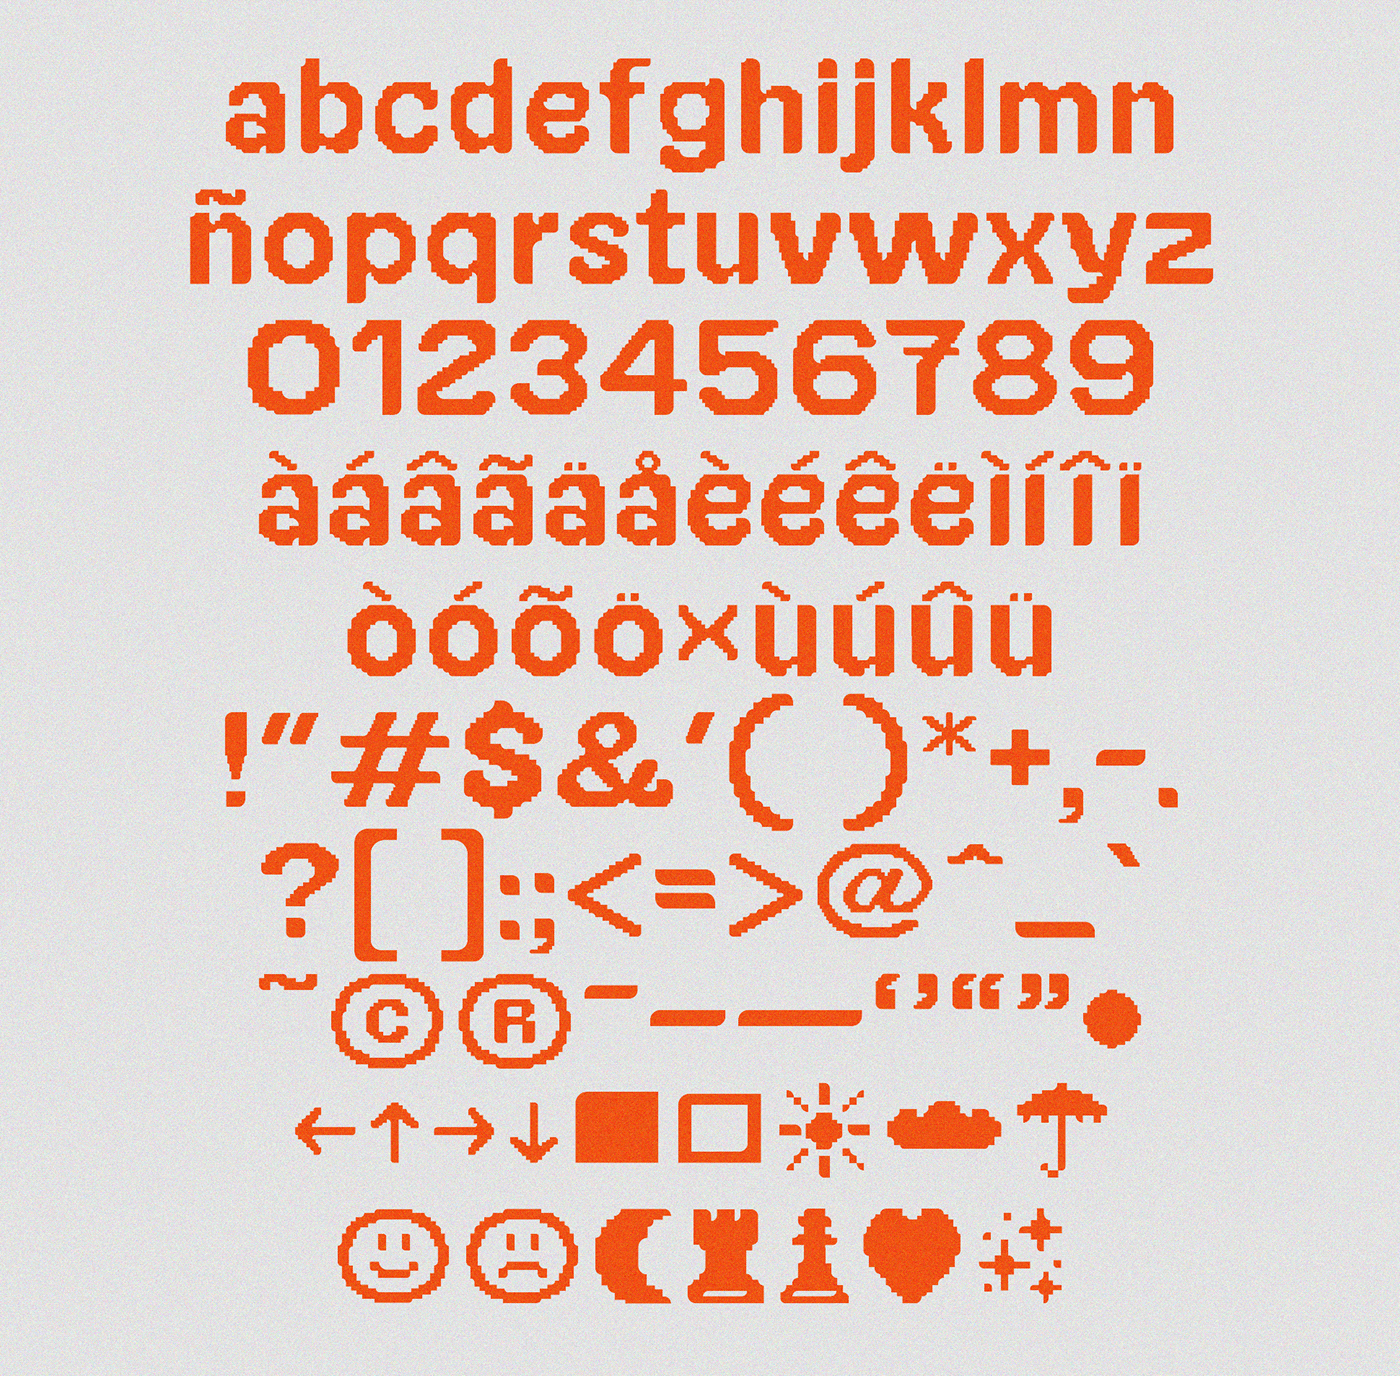 display font display typeface font font design pixel Riso risograph type design typography   typography design